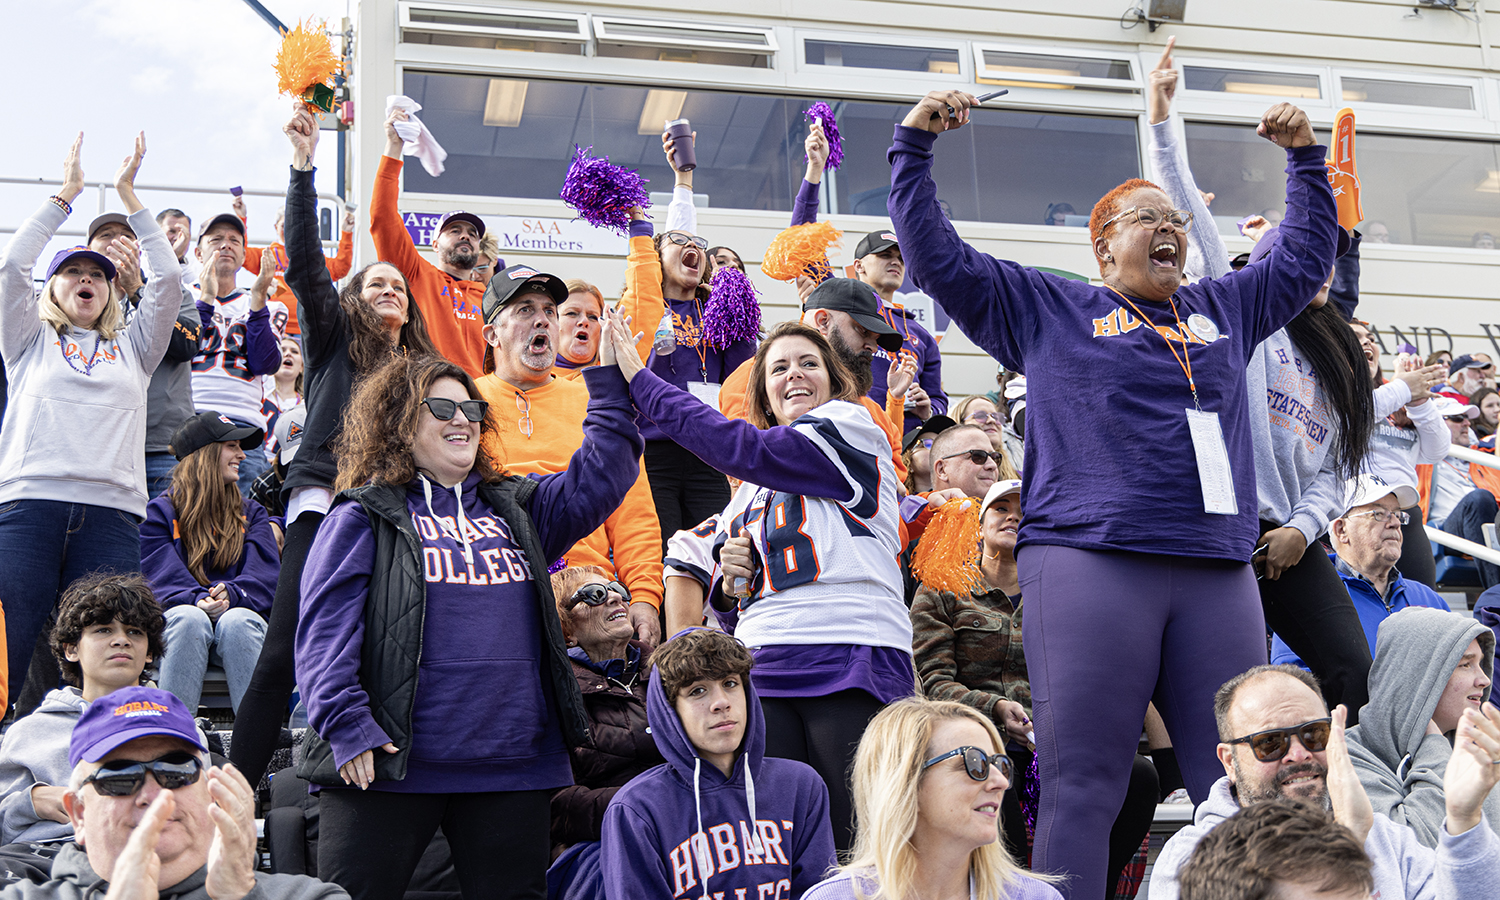 In this edition of This Week in Photos, we feature some of our favorite photos from Homecoming and Family Weekend. Here, fans celebrate a touchdown during Hobart football’s victory over St. Lawrence.